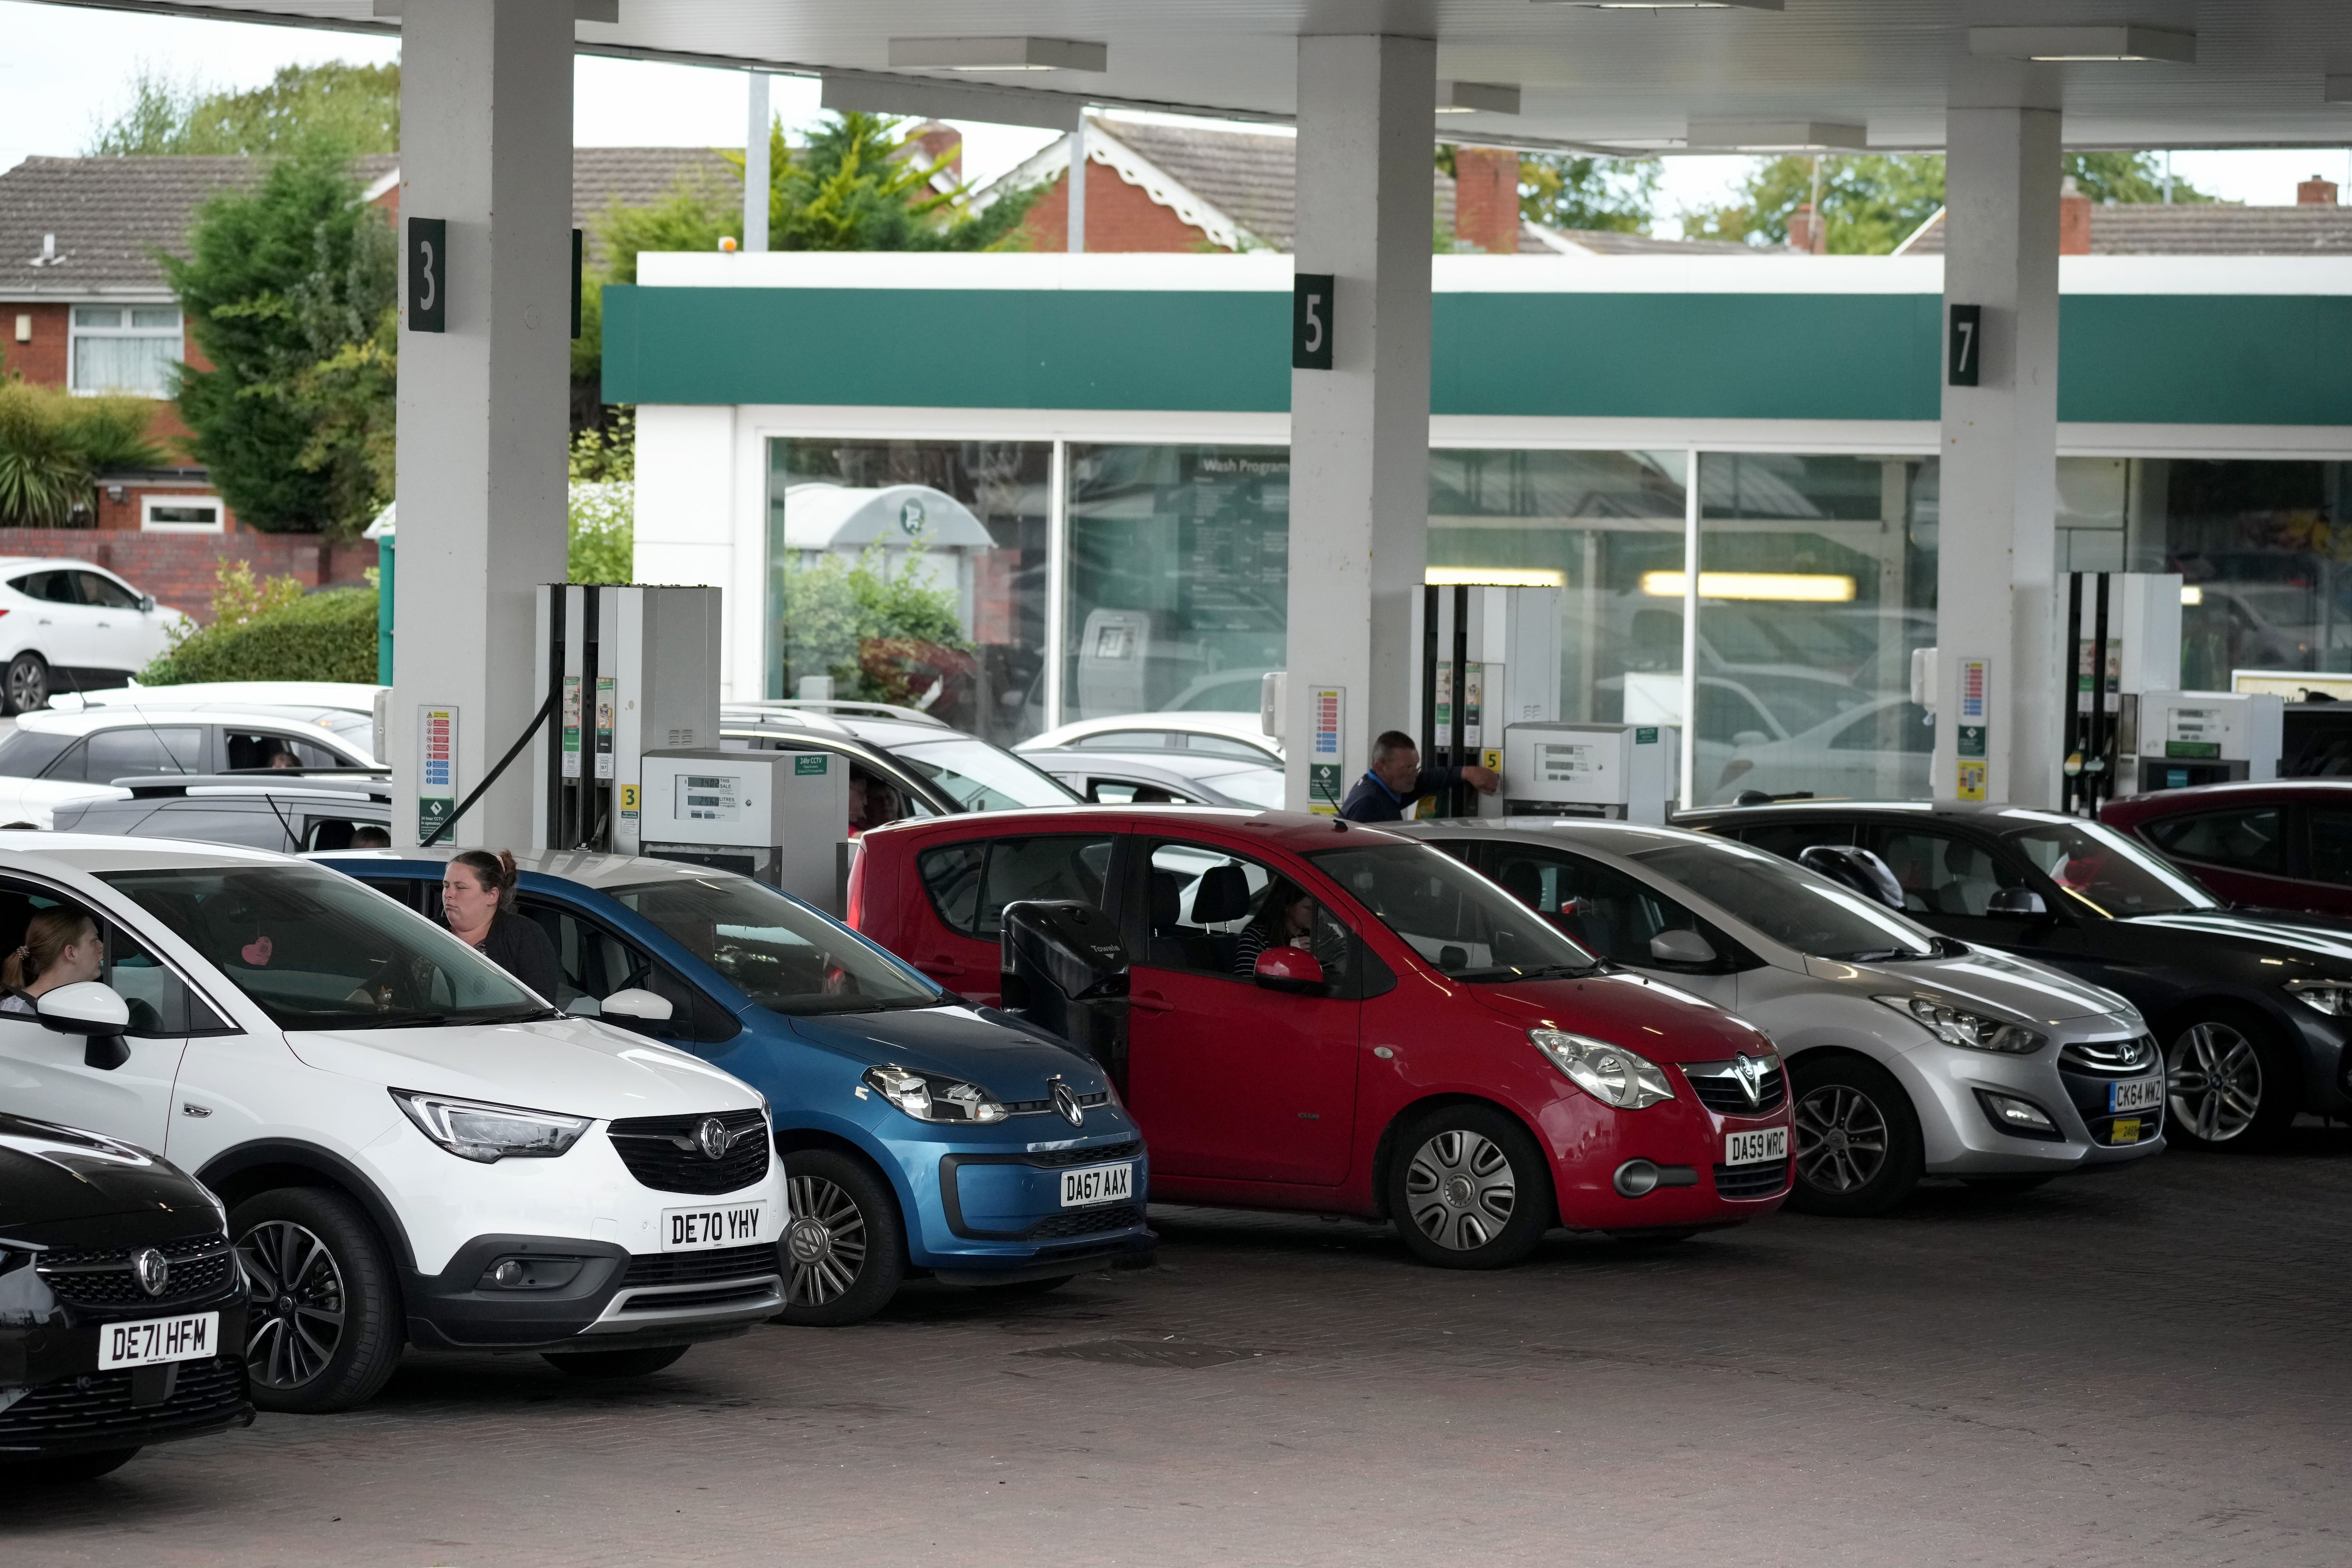 Panic buying continued throughout Britain’s petrol forecourts on Saturday, prompting an industry chief to say “a lot of people are going to go wit